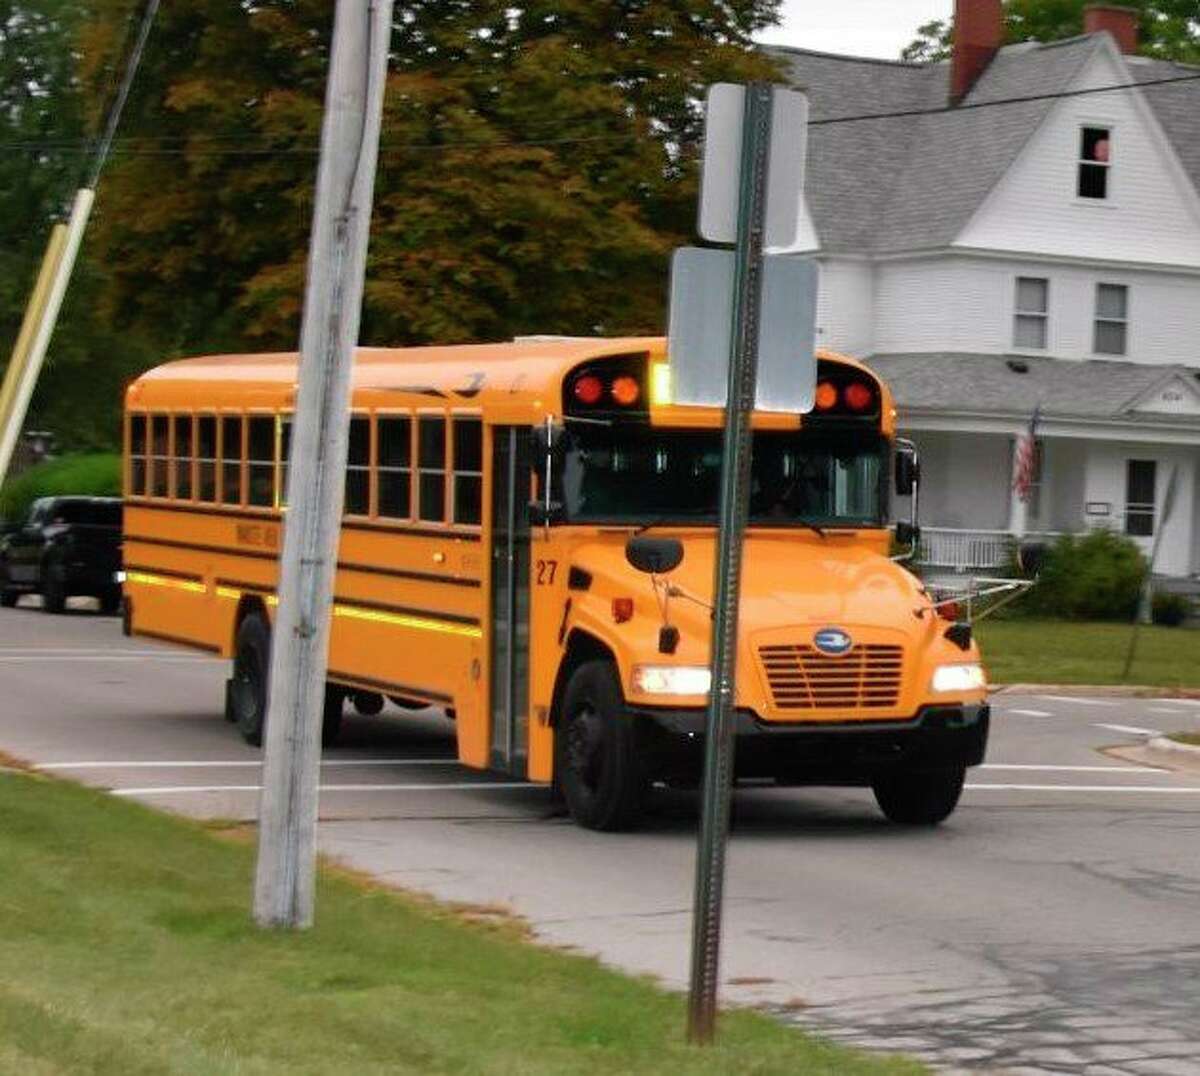 Law enforcement officers across Michigan recently performed dedicated patrols as part of a safety initiative looking for drivers illegally passing school buses.